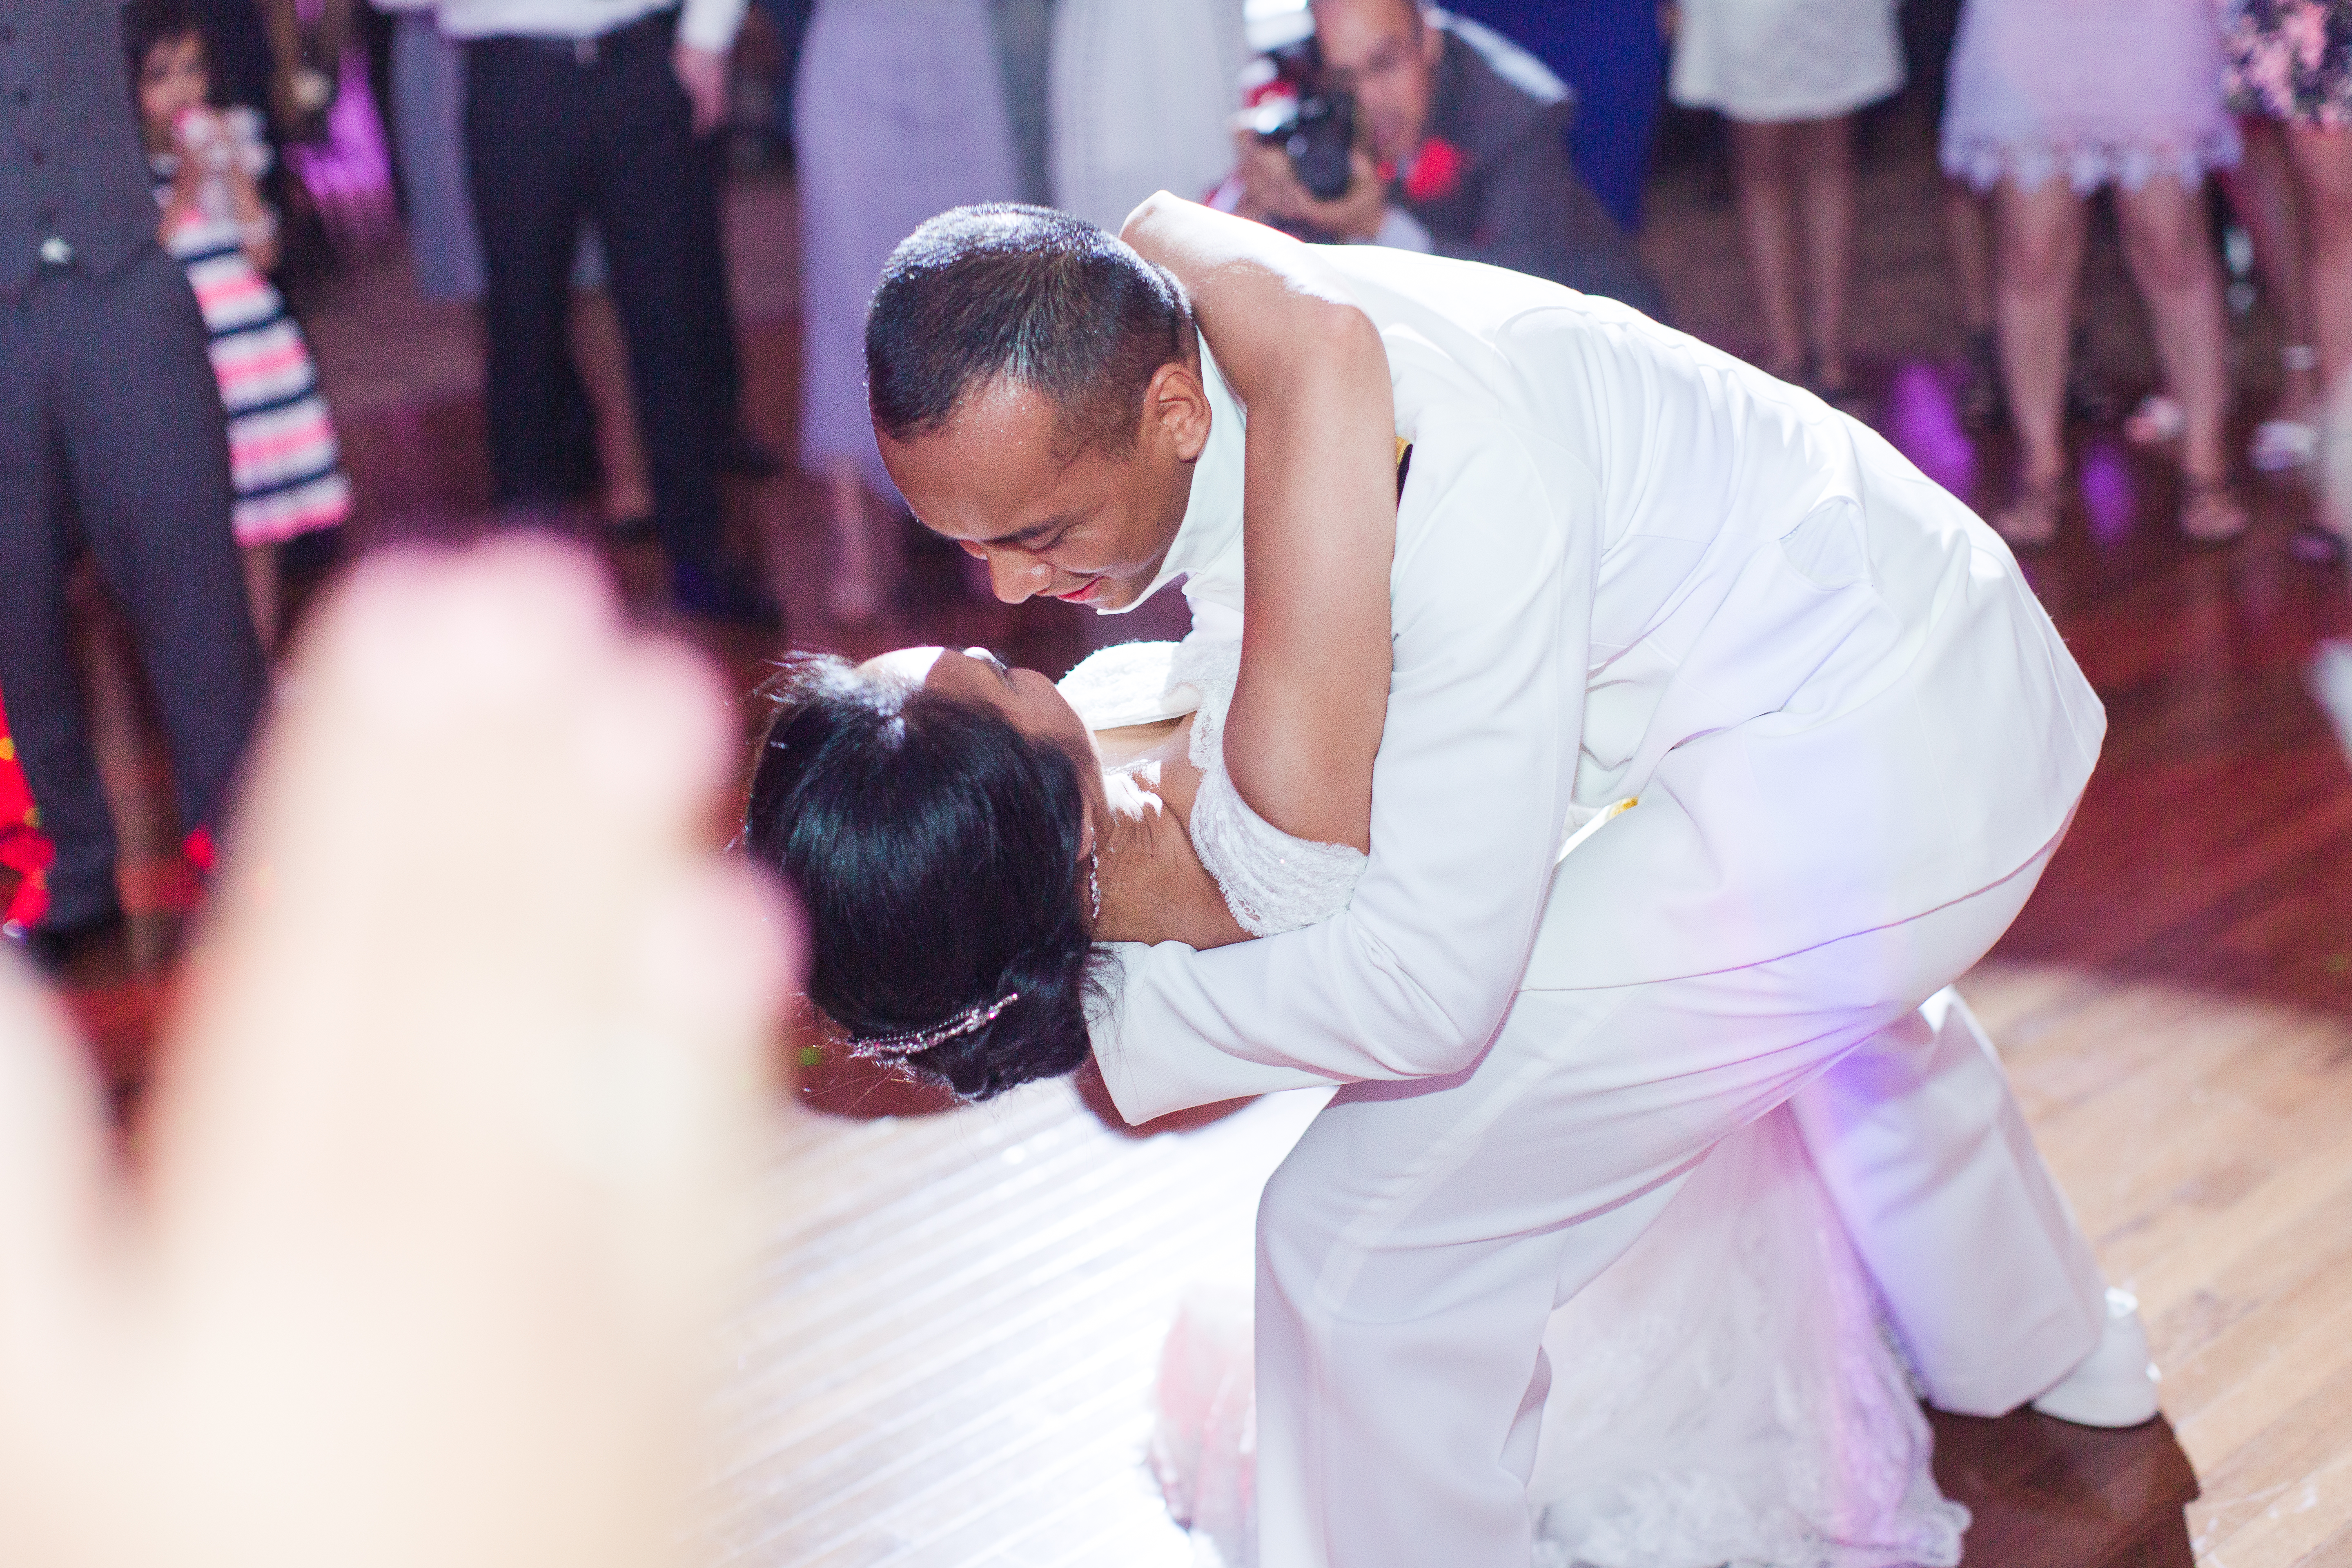 Groom planned a choreographed dance to surprise his new bride at the john marshall ballroom